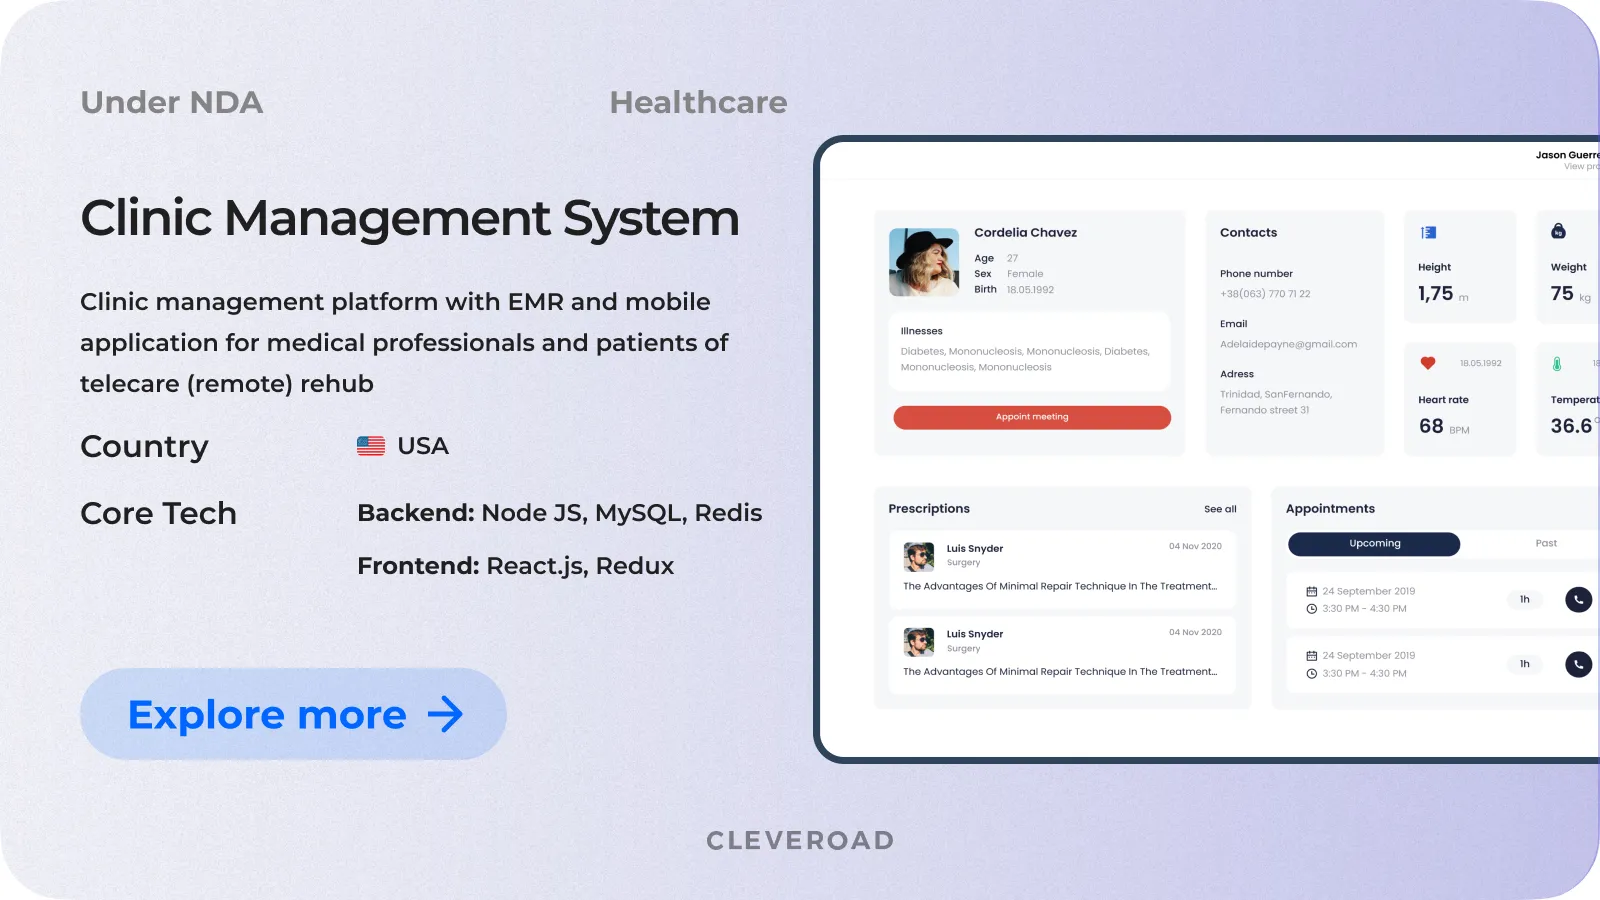 Clinic Management System developed by Cleveroad